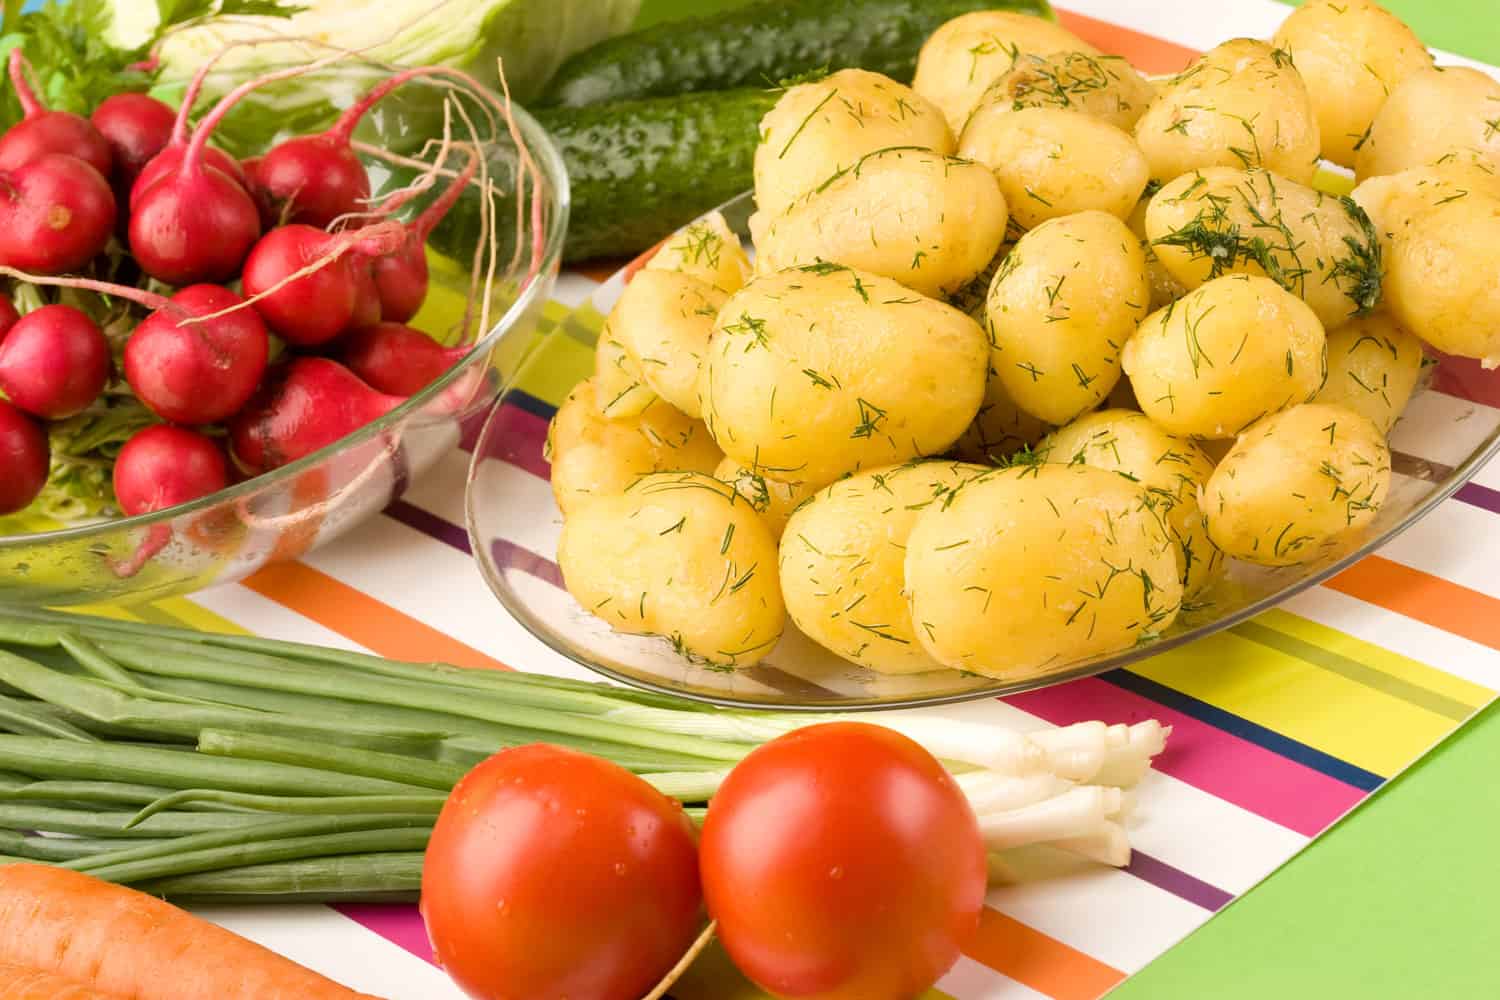 Peeled and boiled potatoes sprinkled with dill on a glass platter